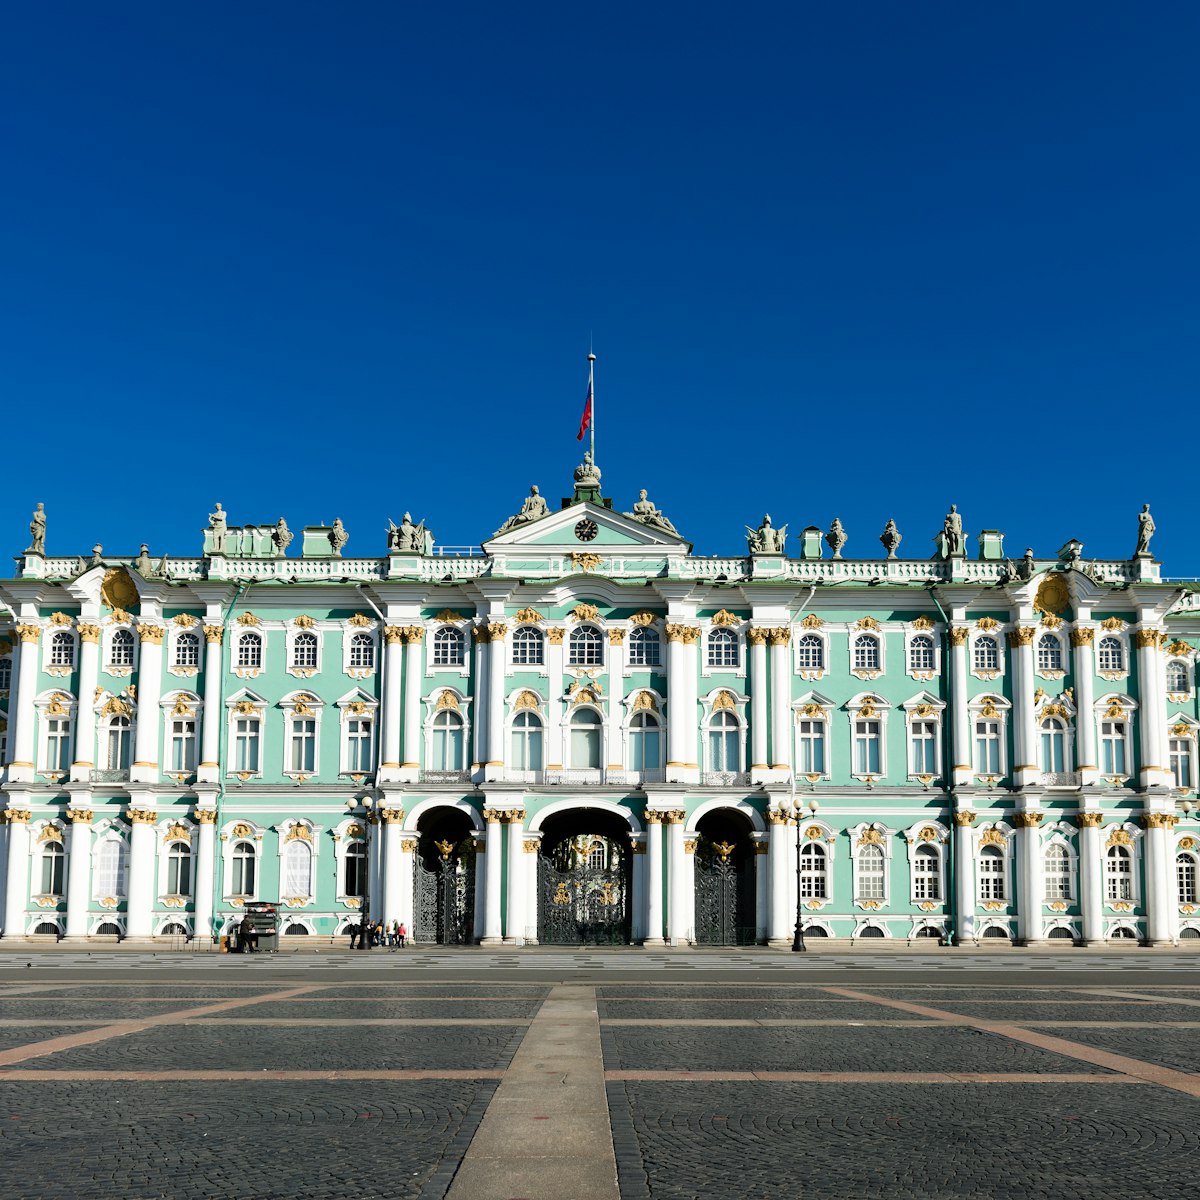 Winter Palace, Hermitage museum in Saint Petersburg, Russia
alexander, architectural, architecture, art, built, city, cloud, cloudy, column, cross, culture, elizabeth, empire, europe, hermitage, history, house, imperial, museum, old, outdoor, palace, panorama, panoramic, park, peter, peterburg, petersburg, royal, russia, russian, saint, scene, sky, square, st, state, street, style, tourism, tourist, town, traditional, winter